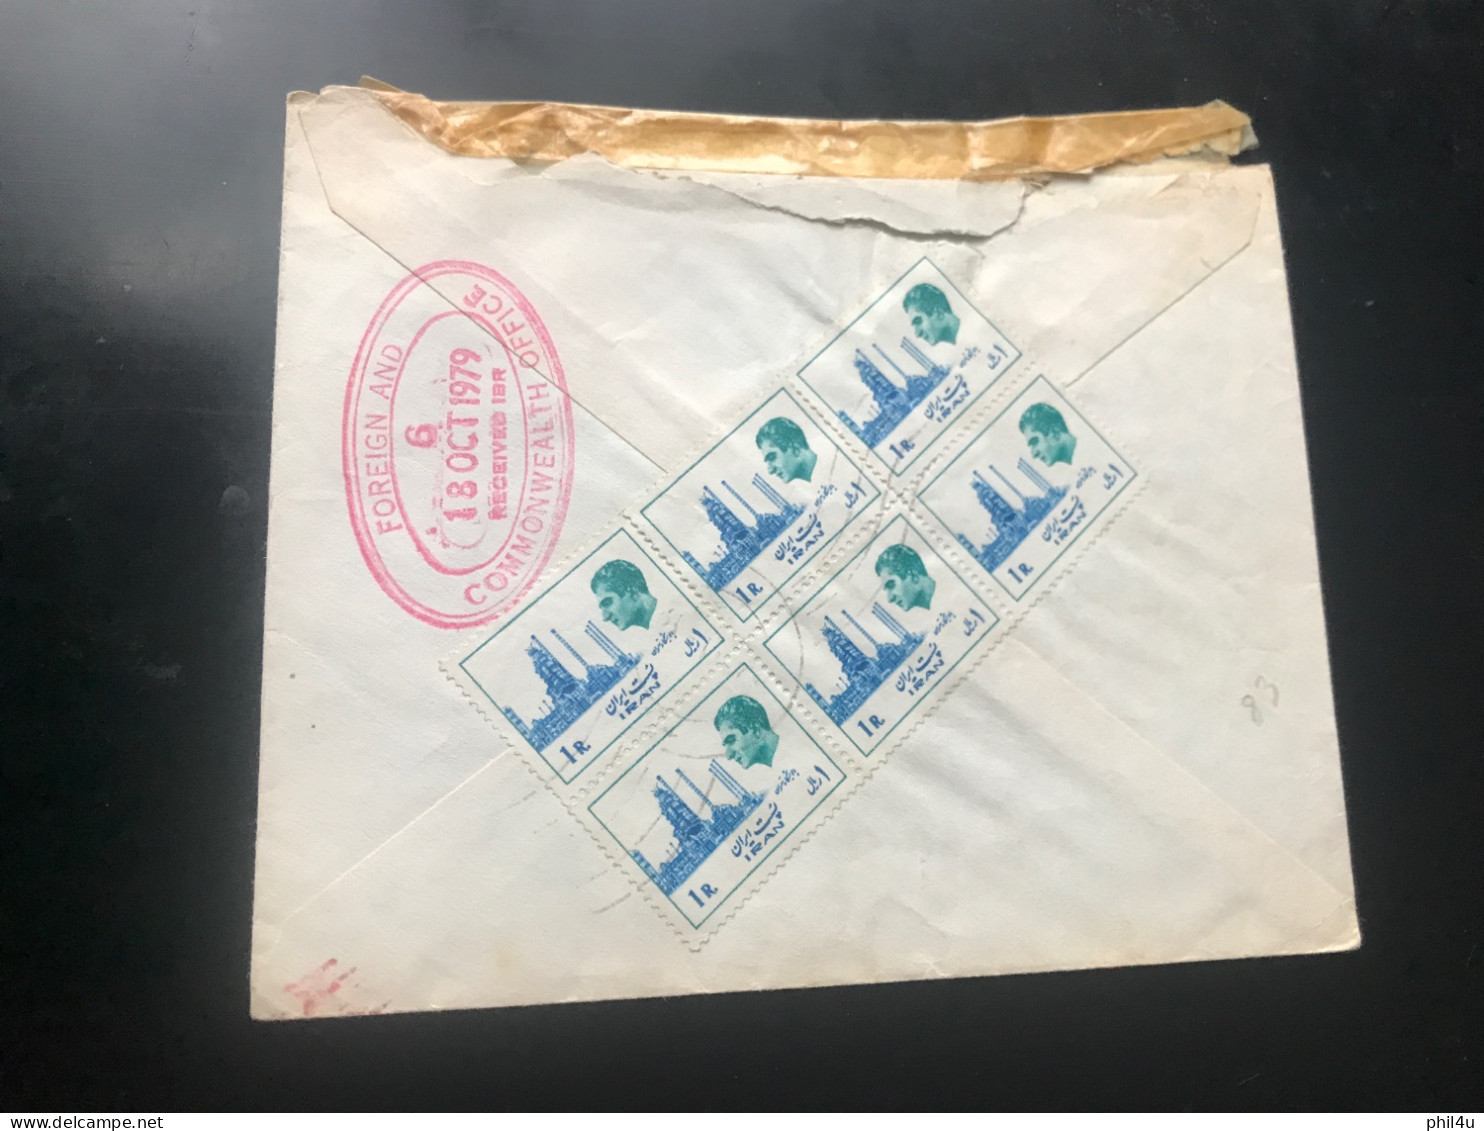 2 Iran Covers To BBC England By Airmail 1979 See Photos - Iran